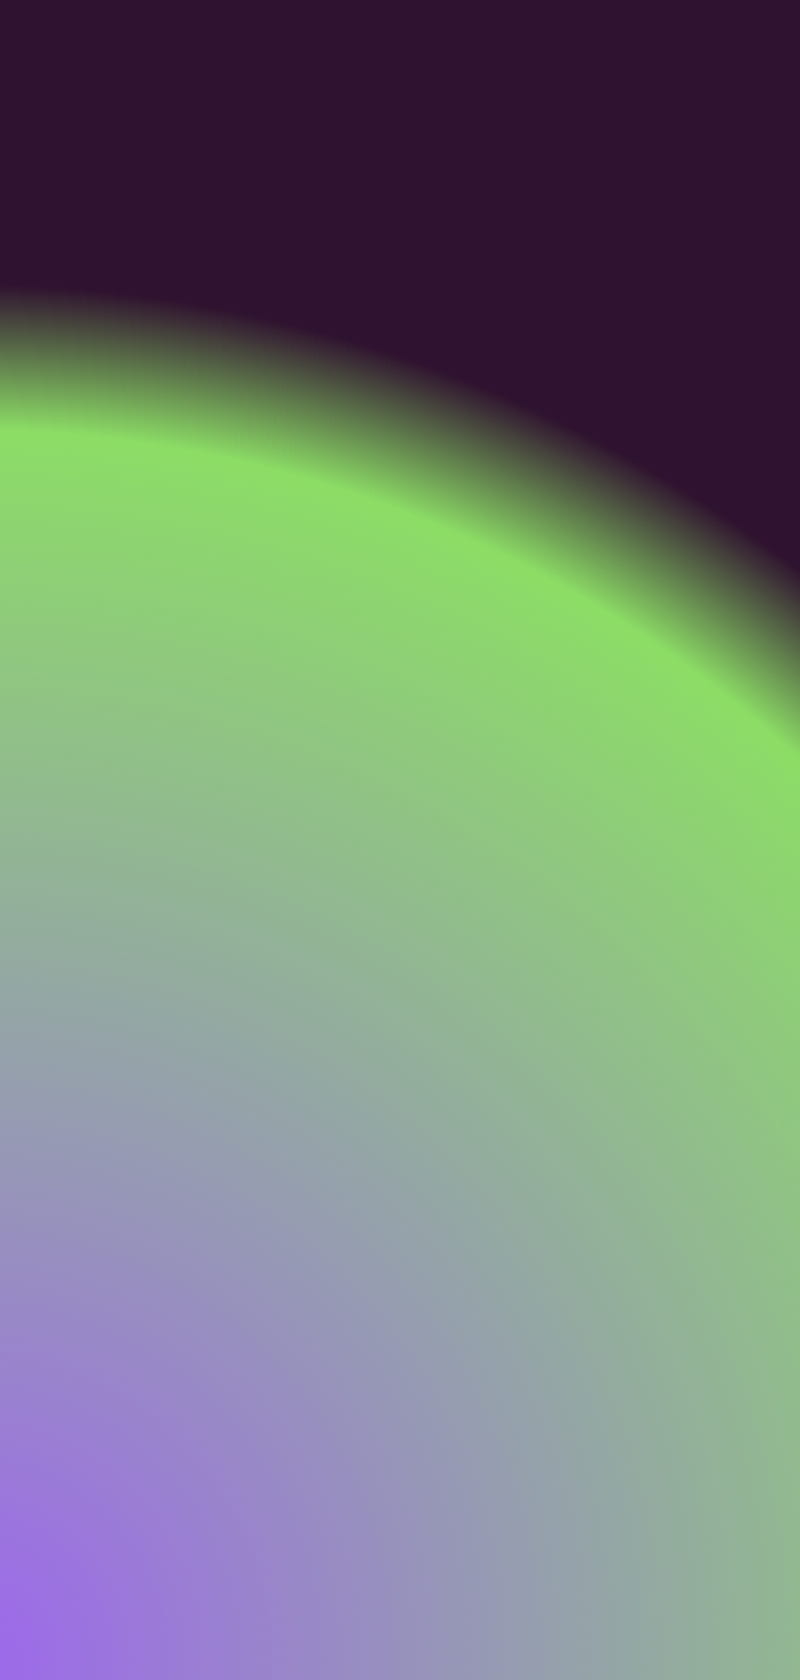 Notch Hide Green Aura, Aurel, abstract, amoled, android, art, aurora, background, blue, blur, blurry, calm, color, colorful, colors, colours, cool, dark, fresh, gradient, ios, minimal, minimalistic, modern, new, nice, oled, quality, simple, wallpapper, HD phone wallpaper